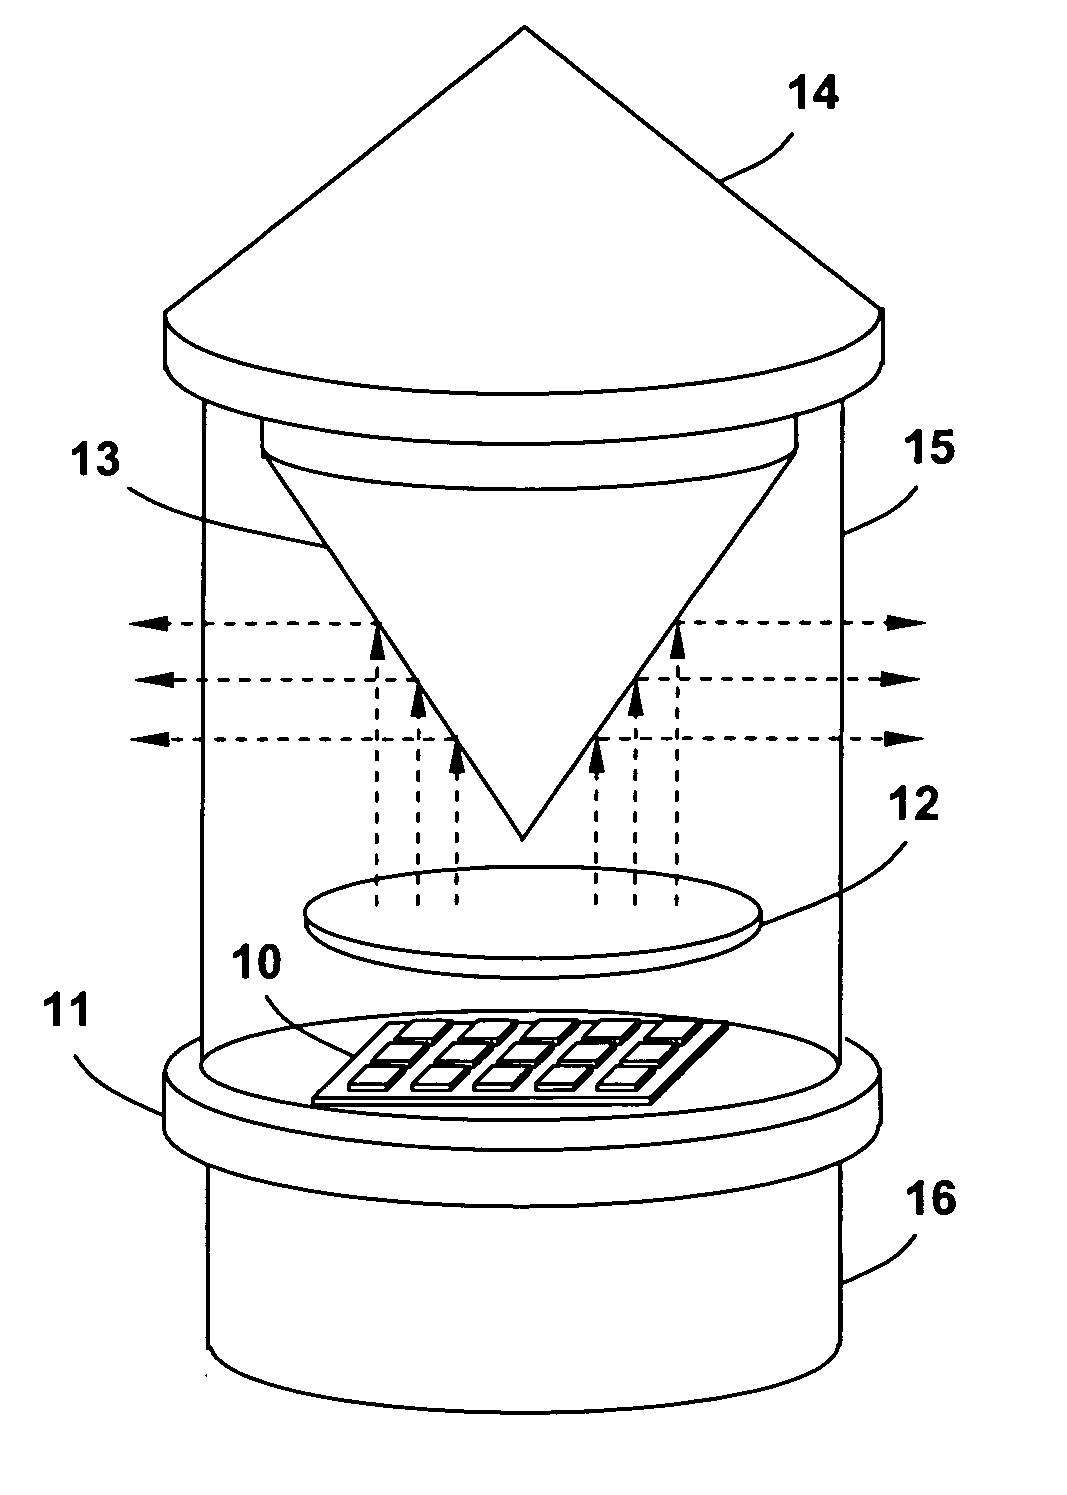 Solid-state lighting apparatus for navigational aids